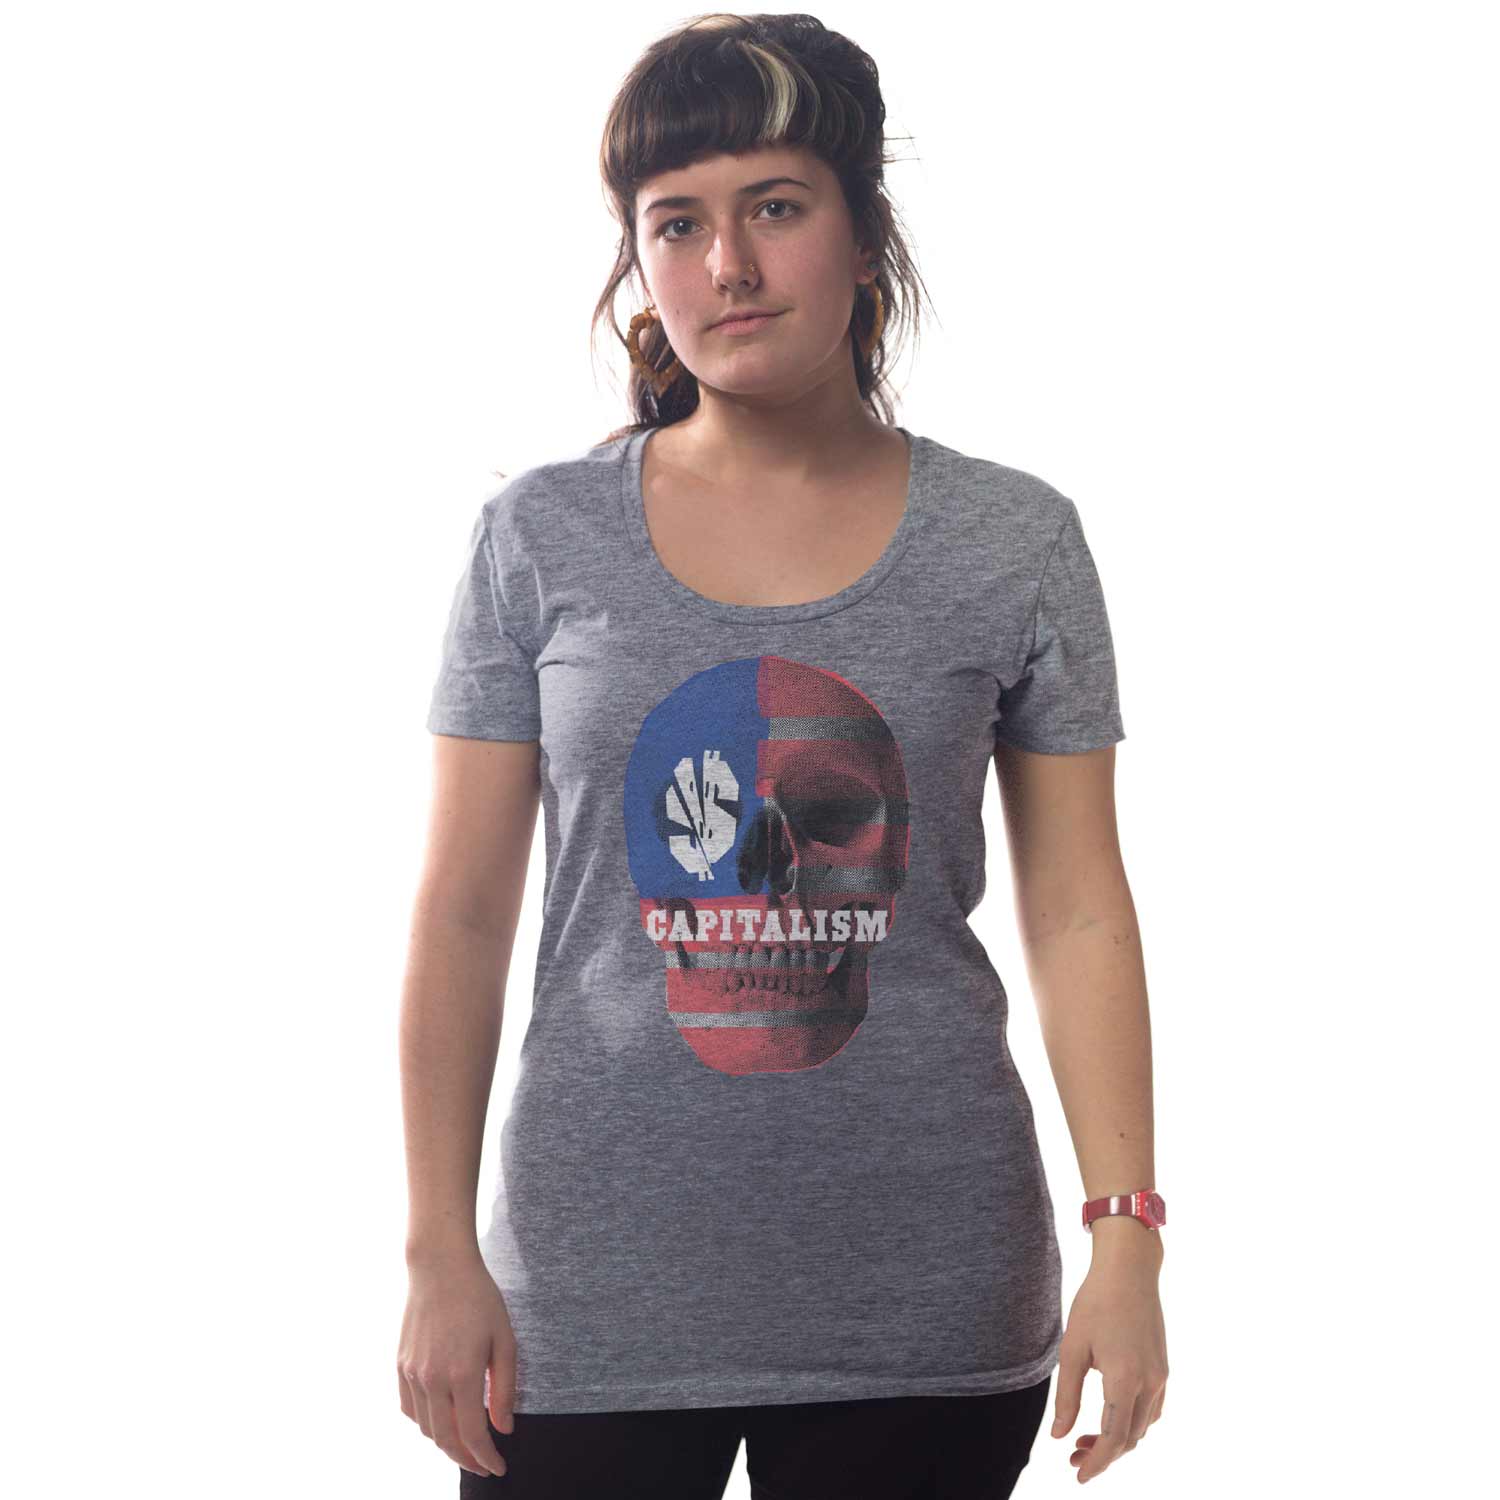 Women's Capitalism Skull Cool Graphic T-Shirt | Retro Activist Triblend Tee on Model | Solid Threads